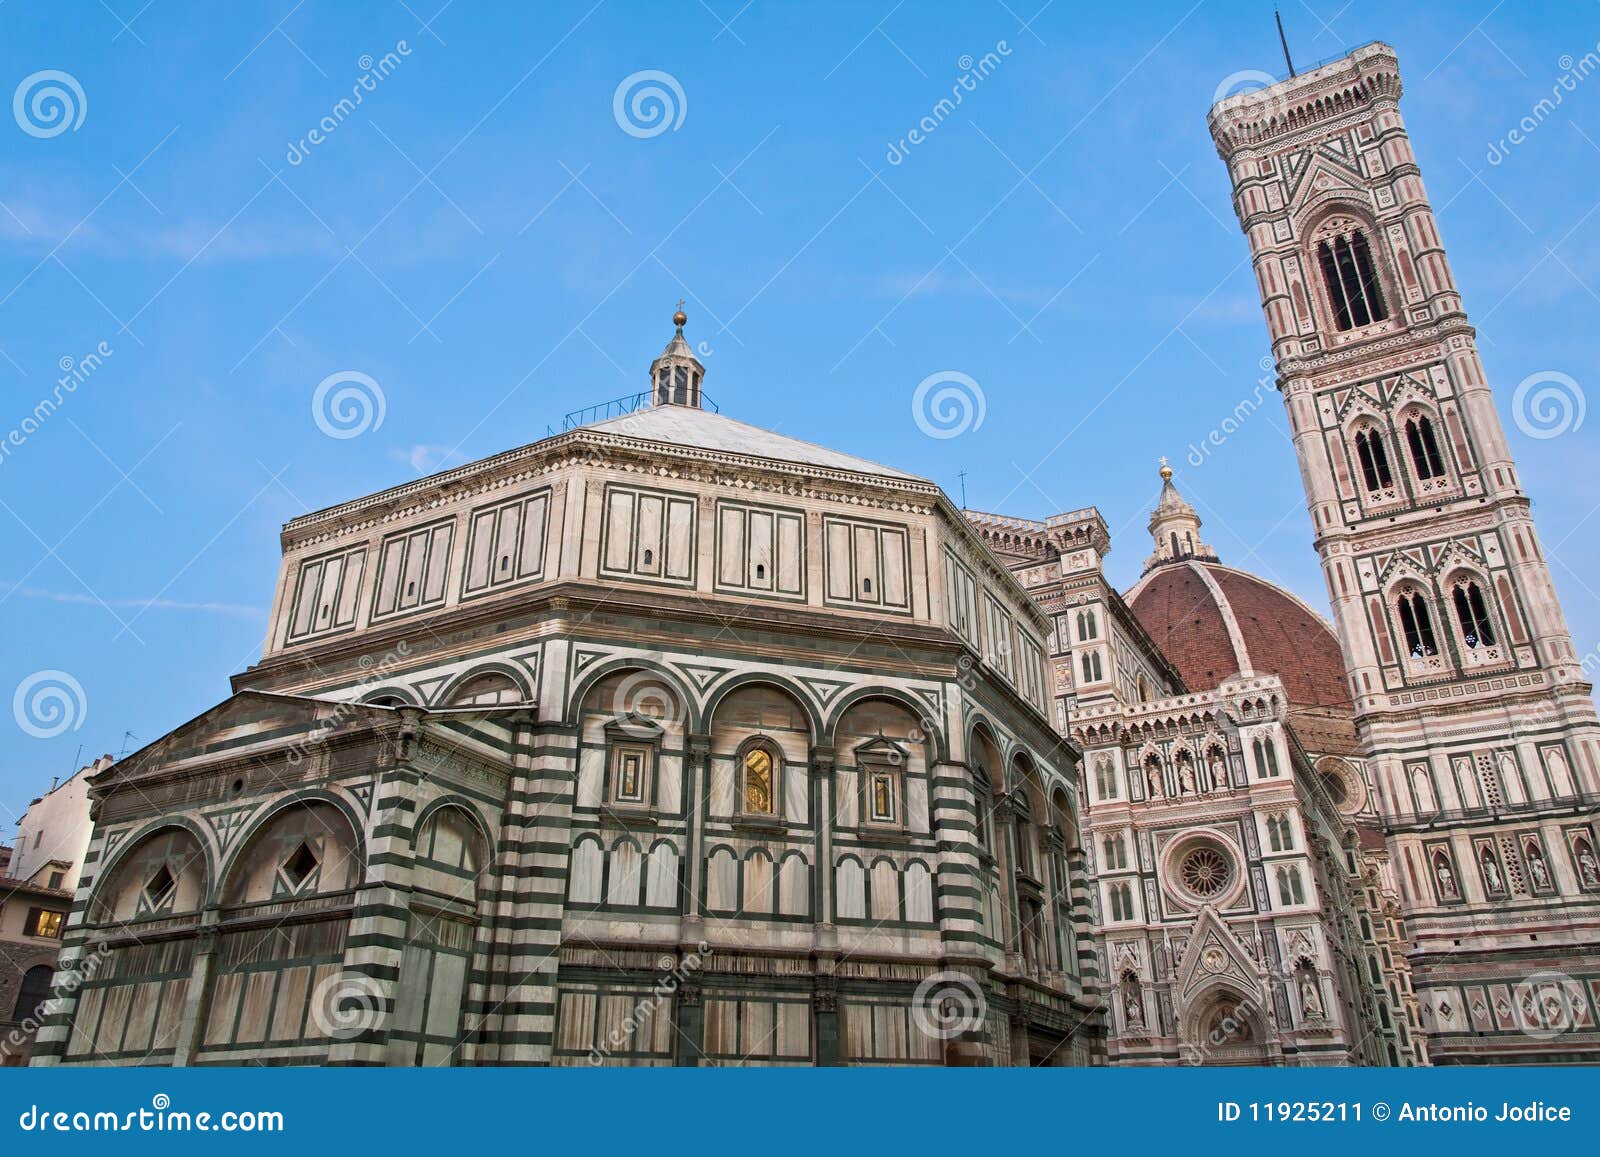 florence baptistery the dome giotto tower